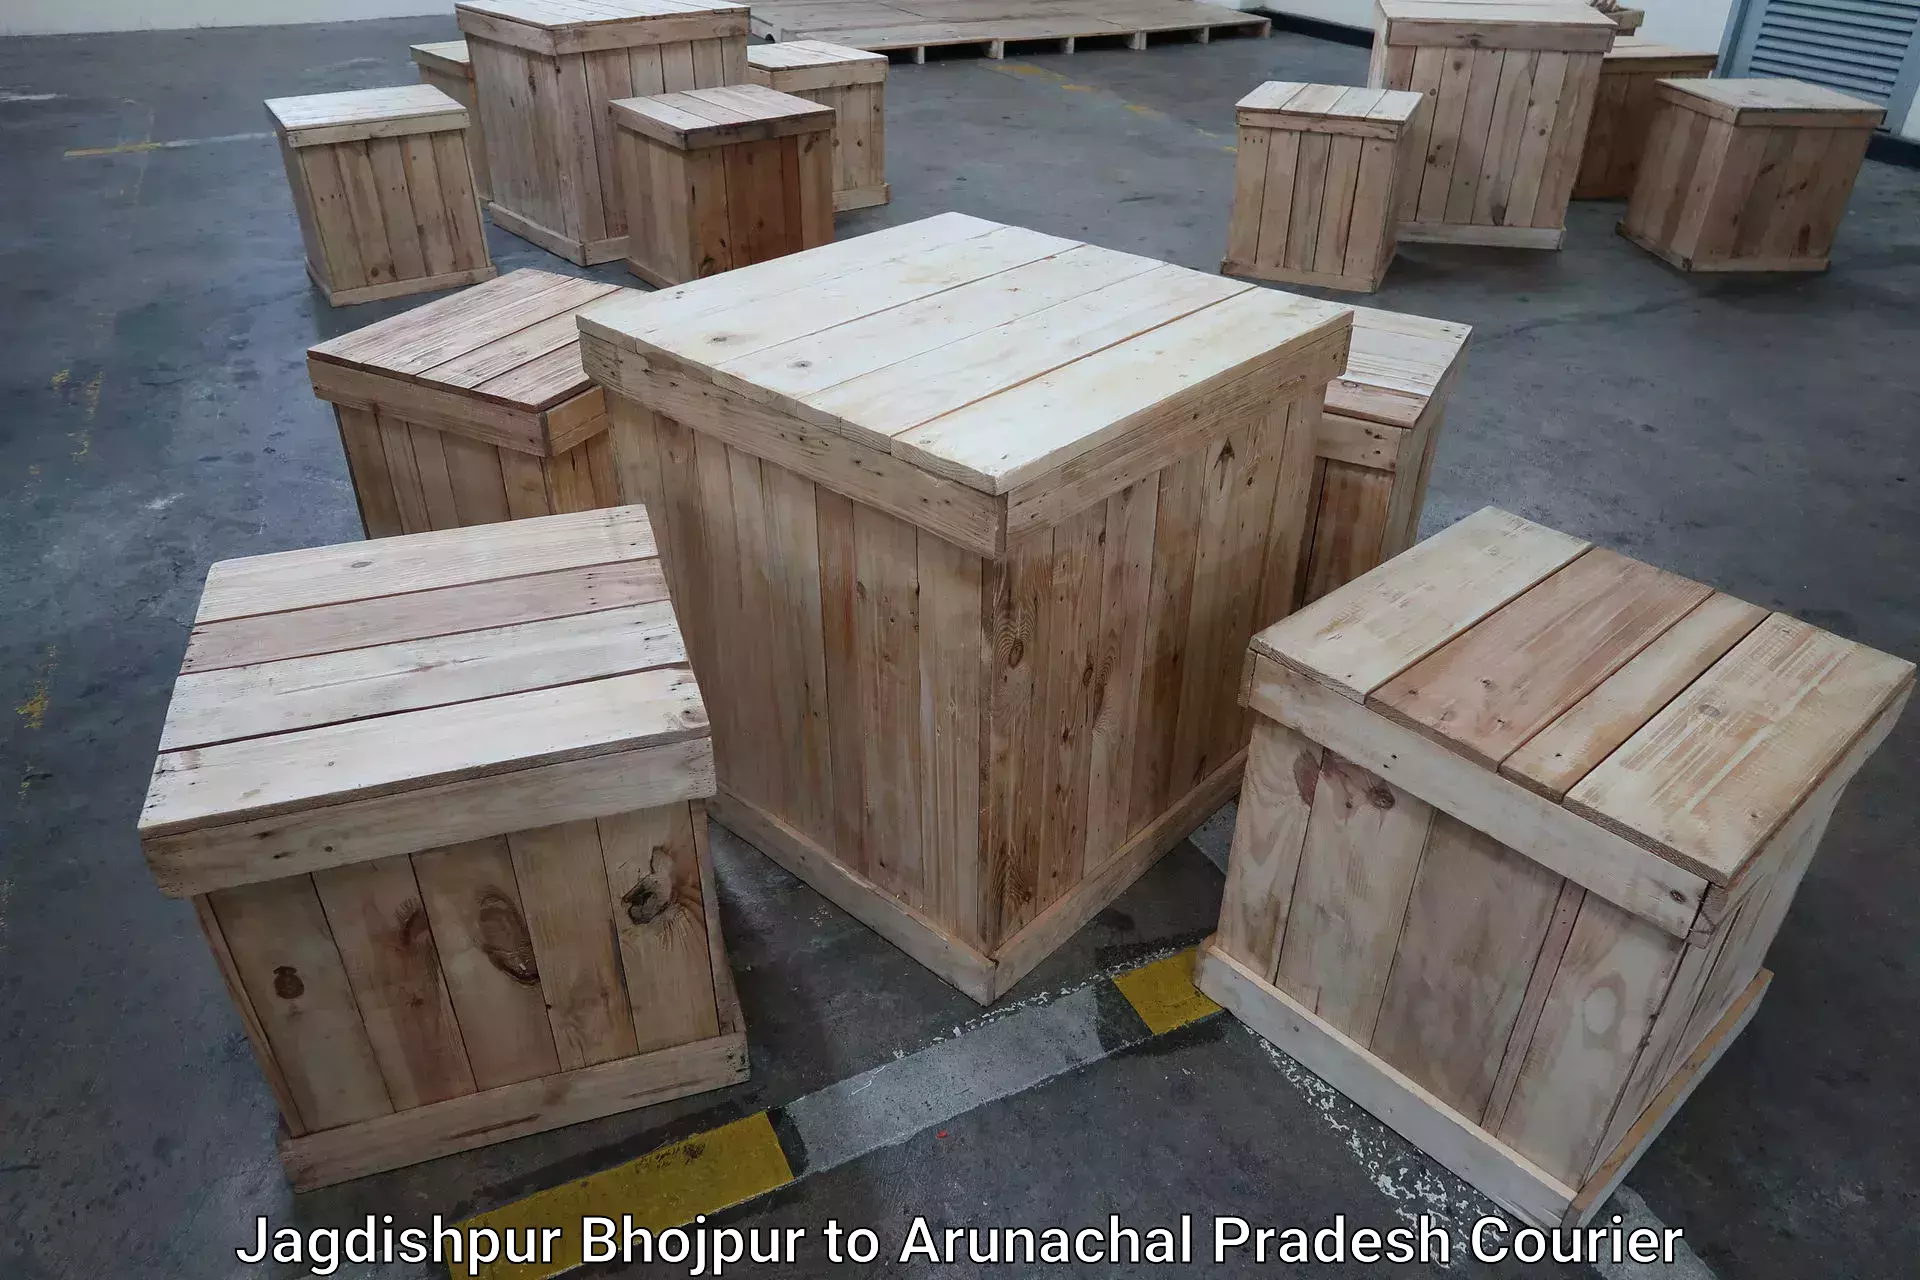 Luggage shipment specialists Jagdishpur Bhojpur to Roing